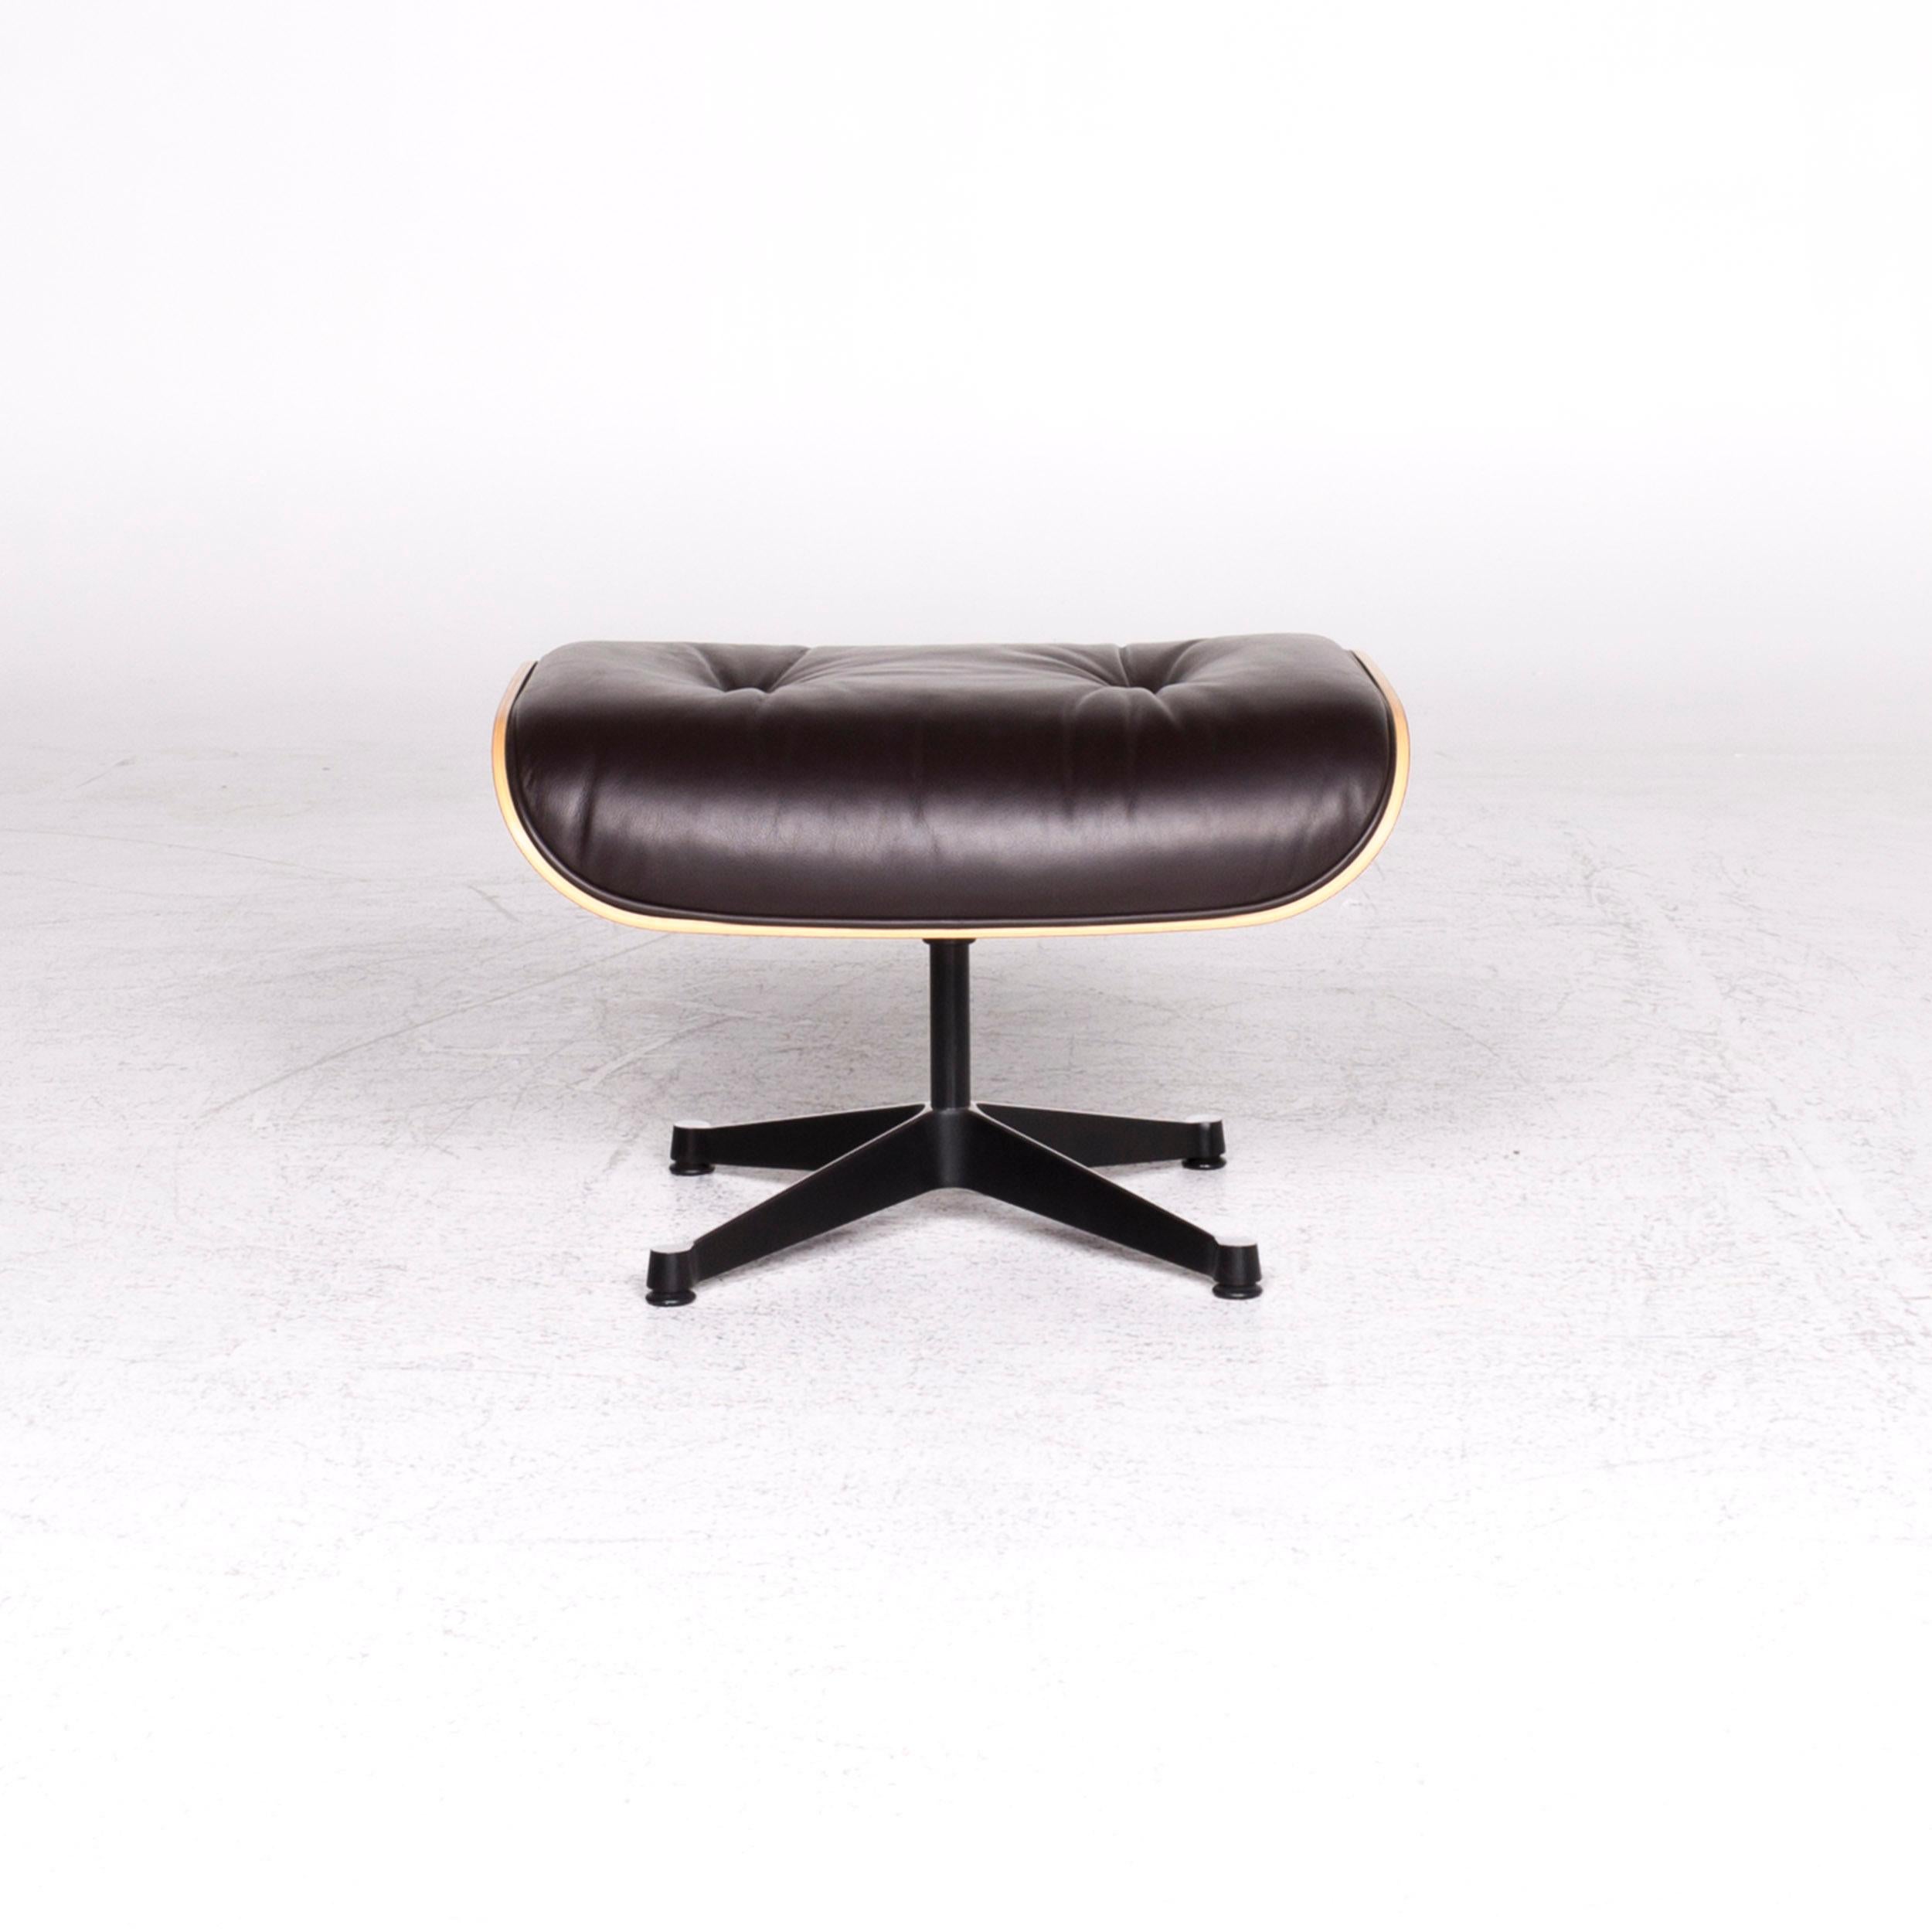 Vitra Eames Lounge Chair Leather Stool Set Brown Charles & Ray Eames Chair For Sale 6